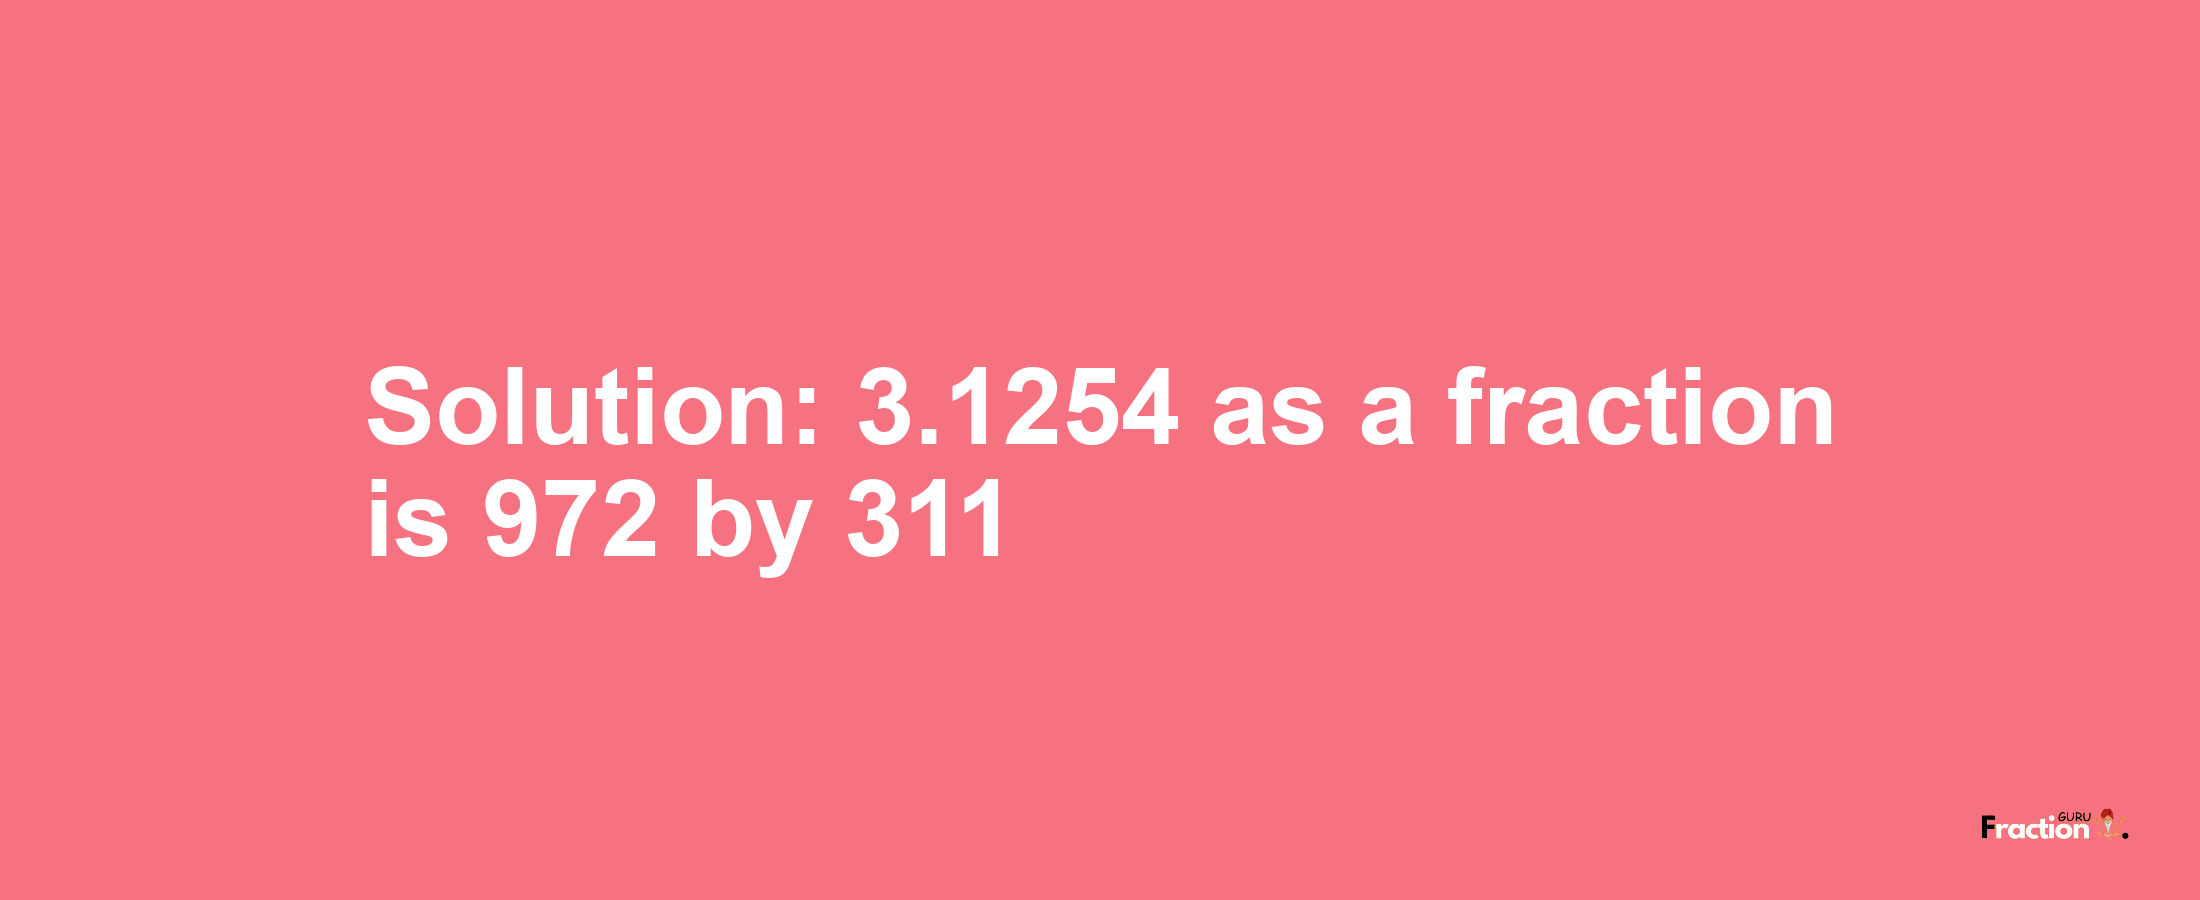 Solution:3.1254 as a fraction is 972/311